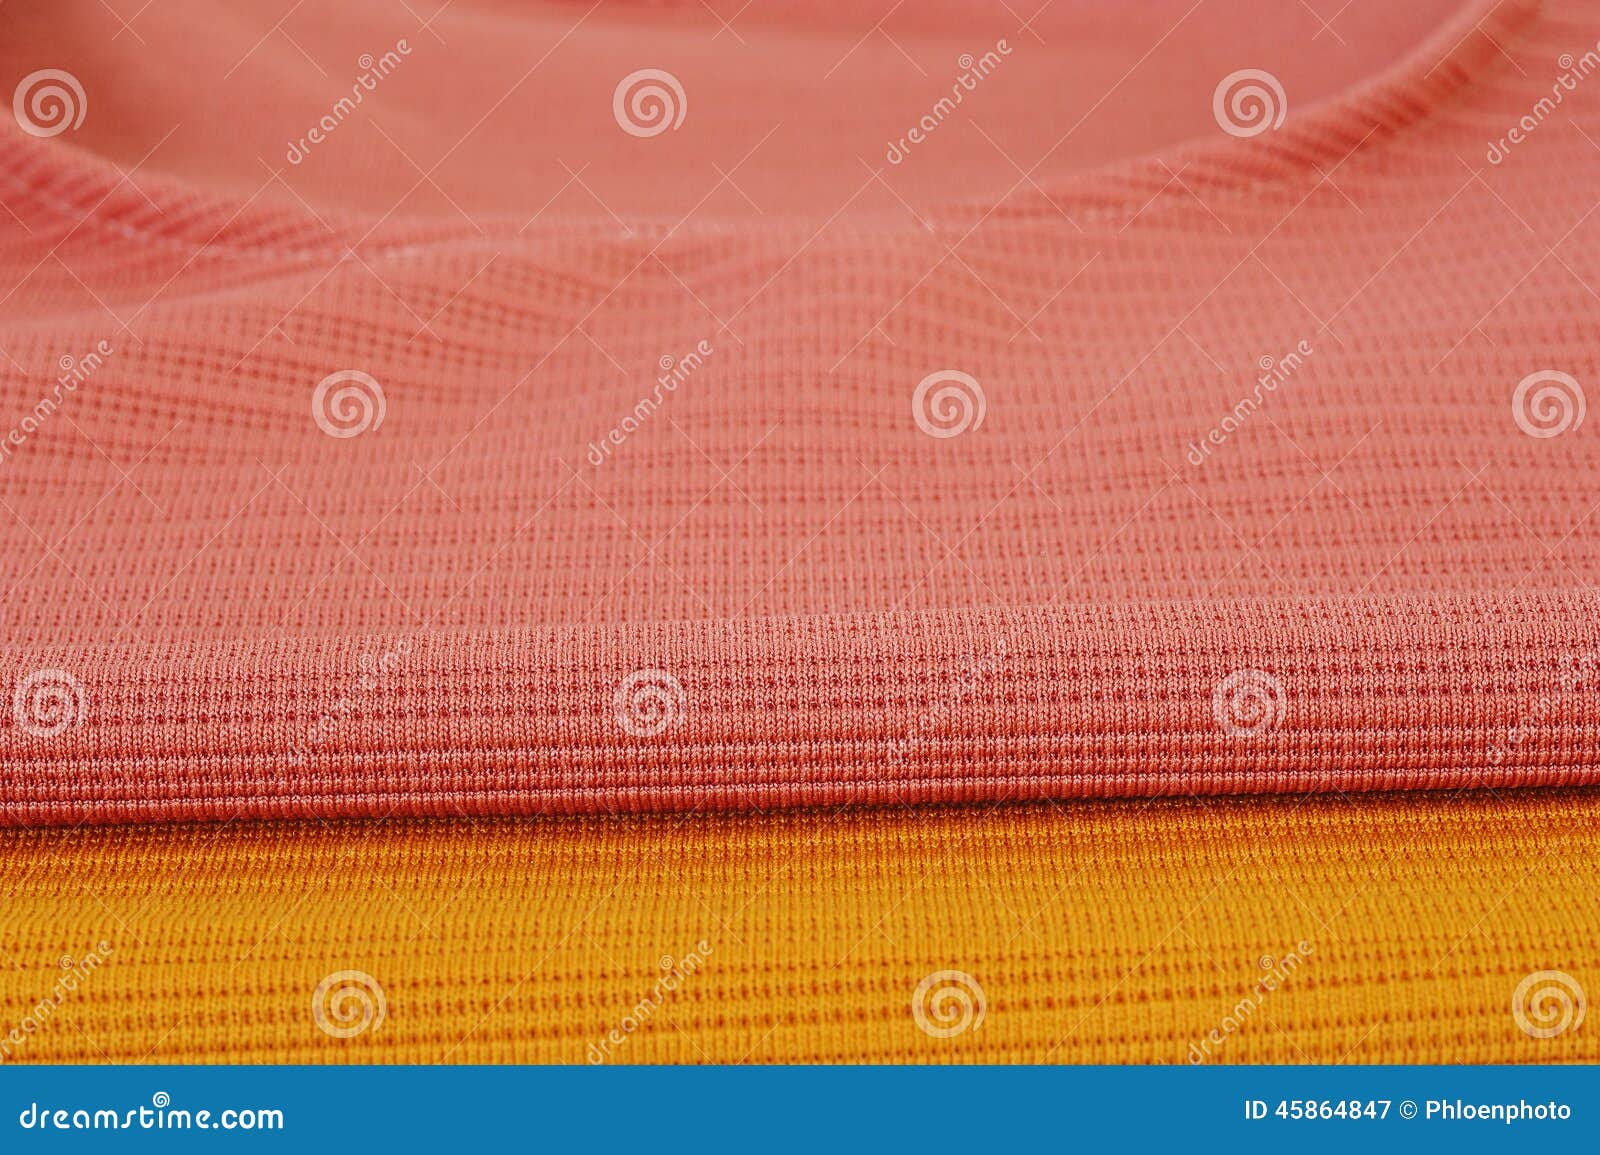 Cloth background ,stack of clothing